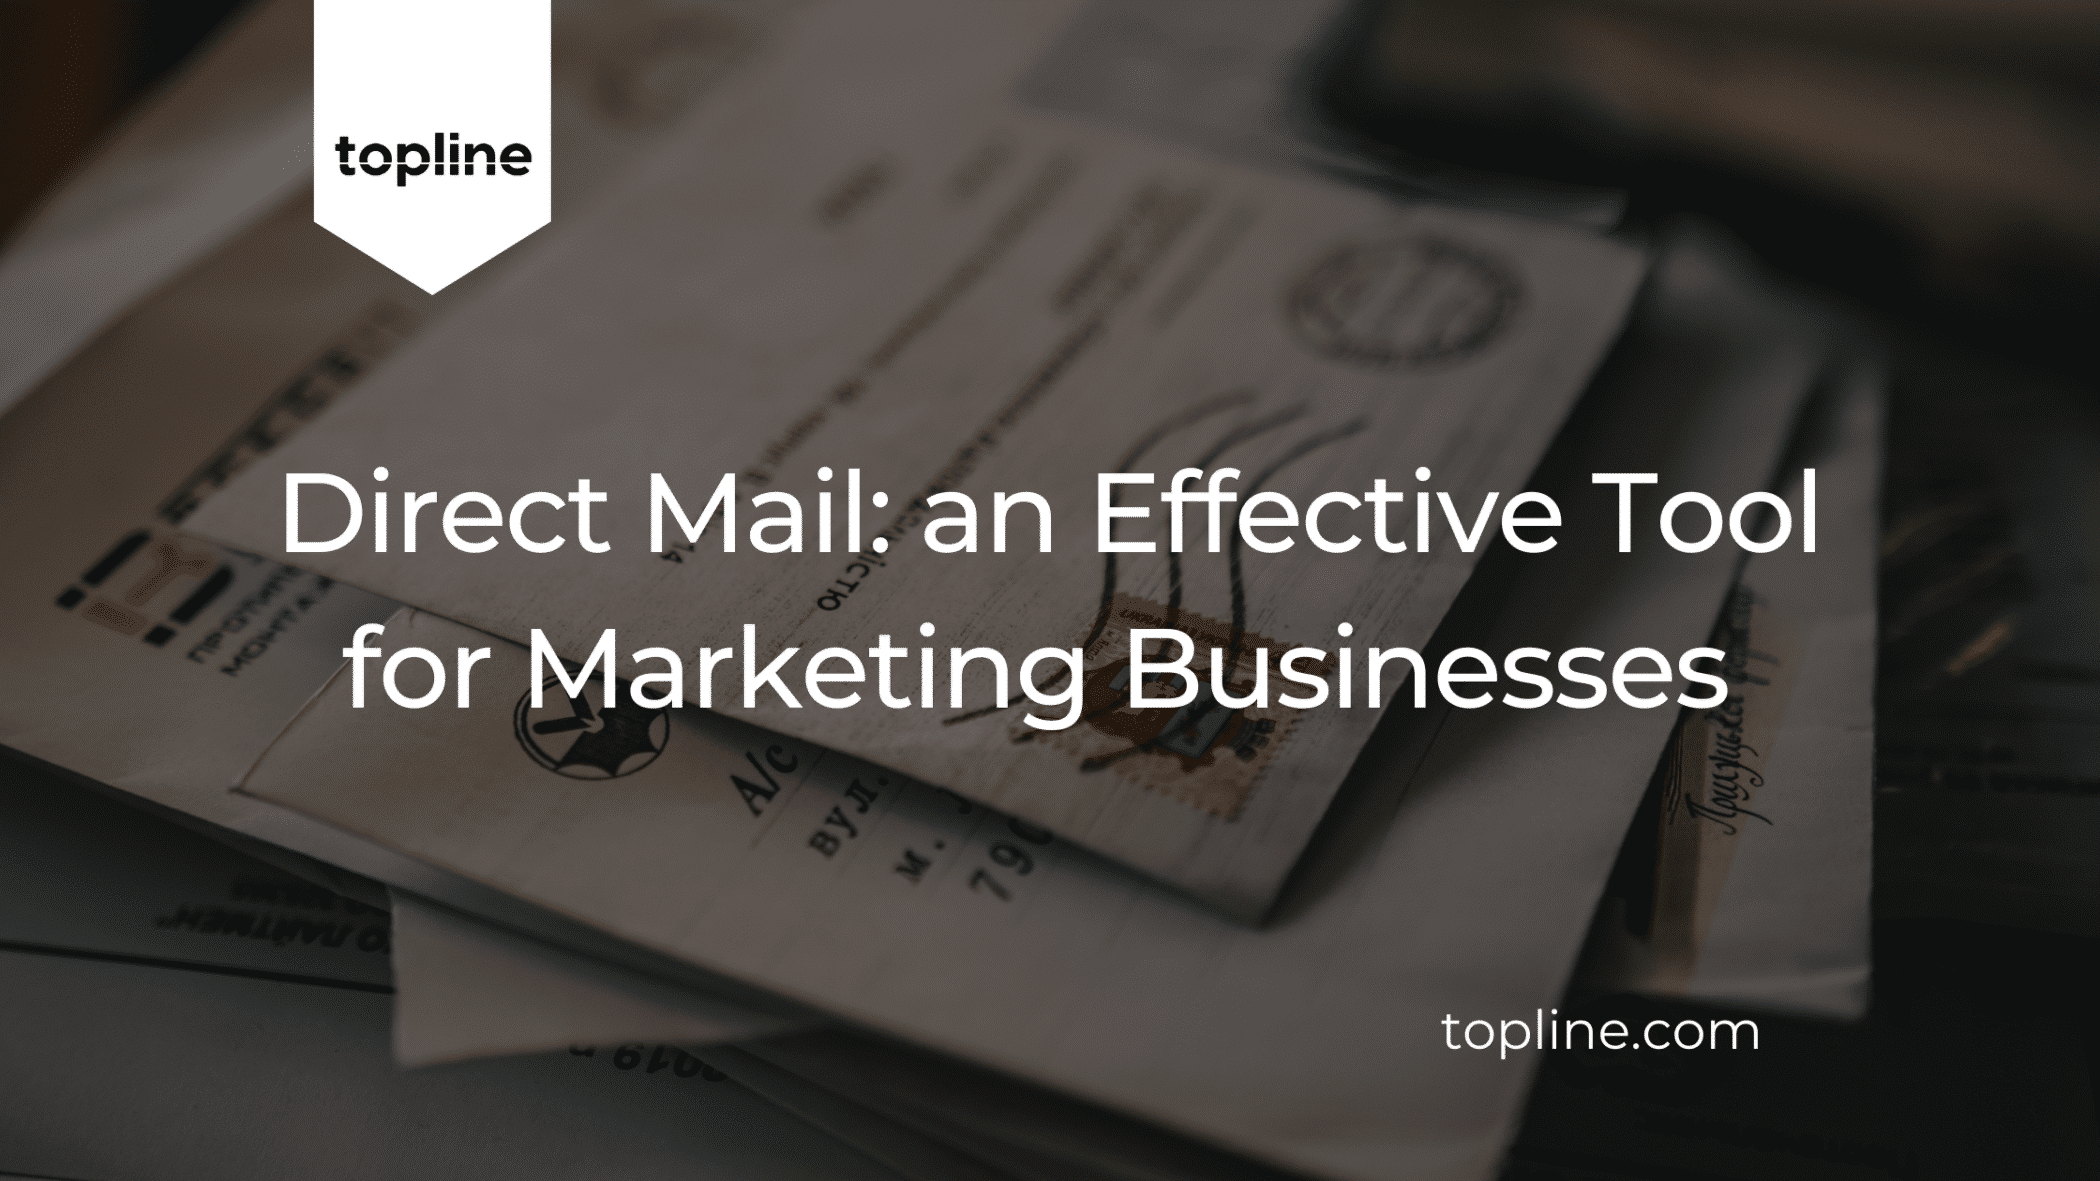 Direct Mail Marketing is Still and Effective Tool for Marketing Business